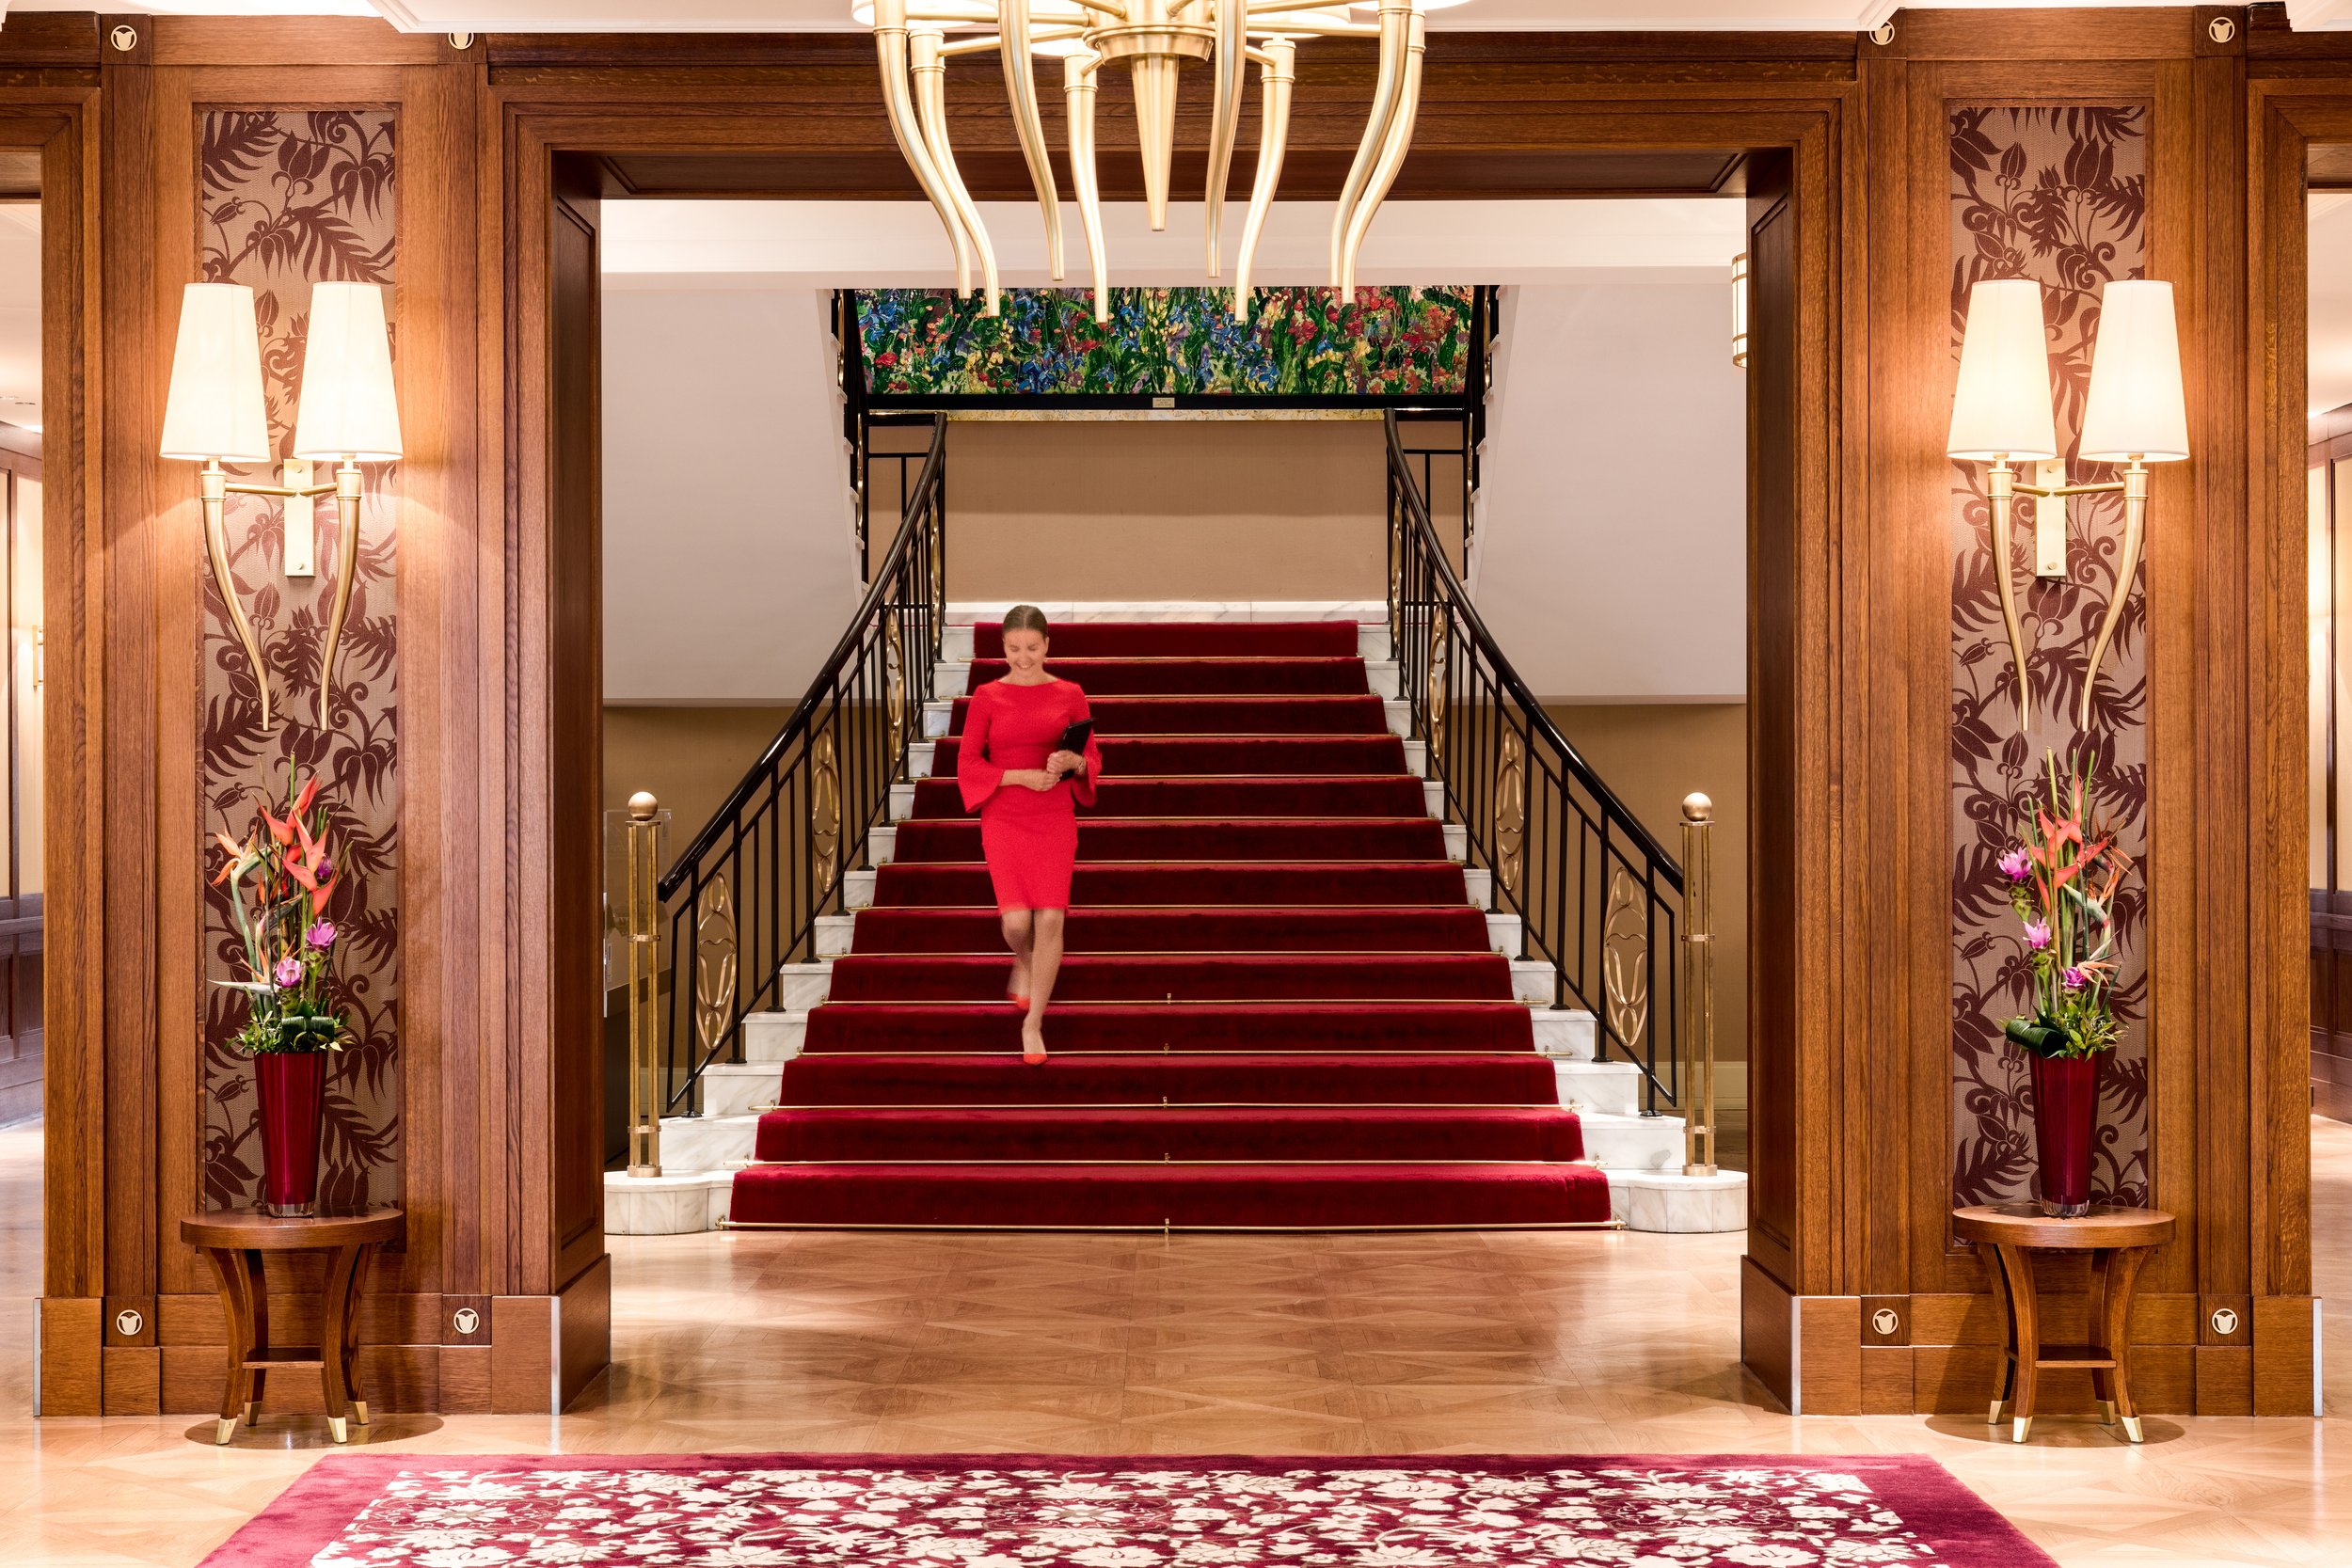 TAT1_Grand Staircase - Lady in Red_Original_3603.jpg